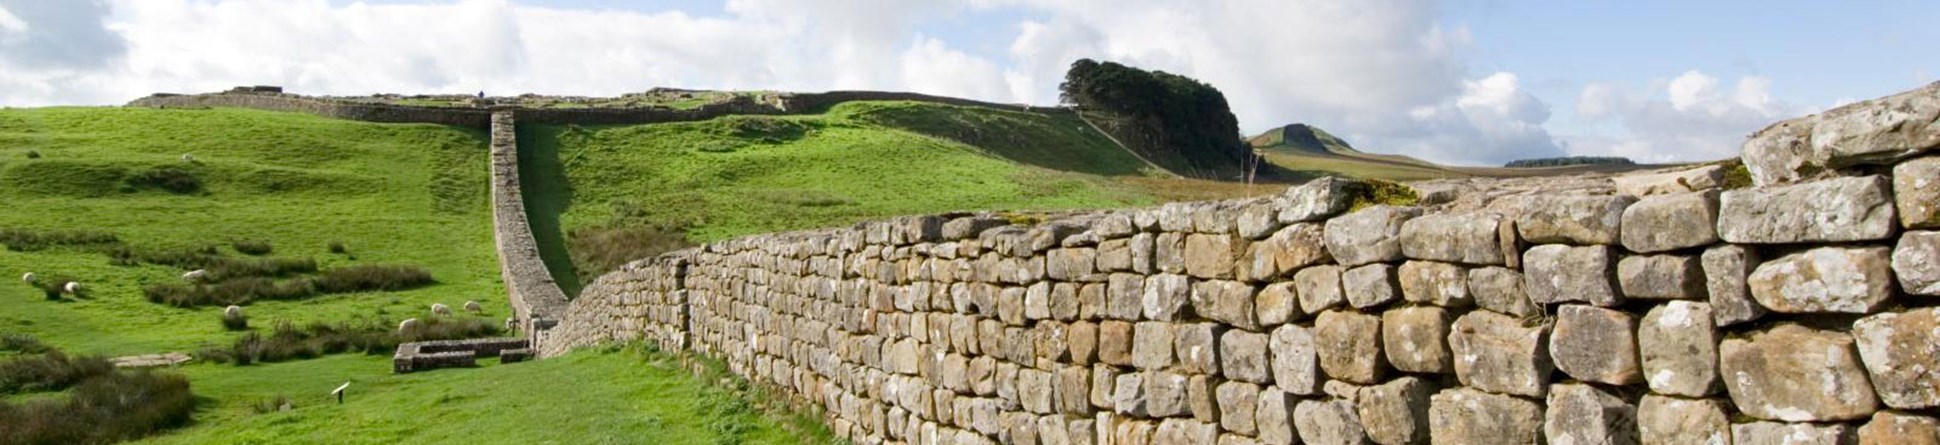 Hadrian's Wall, Northumberland. Section of wall running east over an undulating grassy landscape.